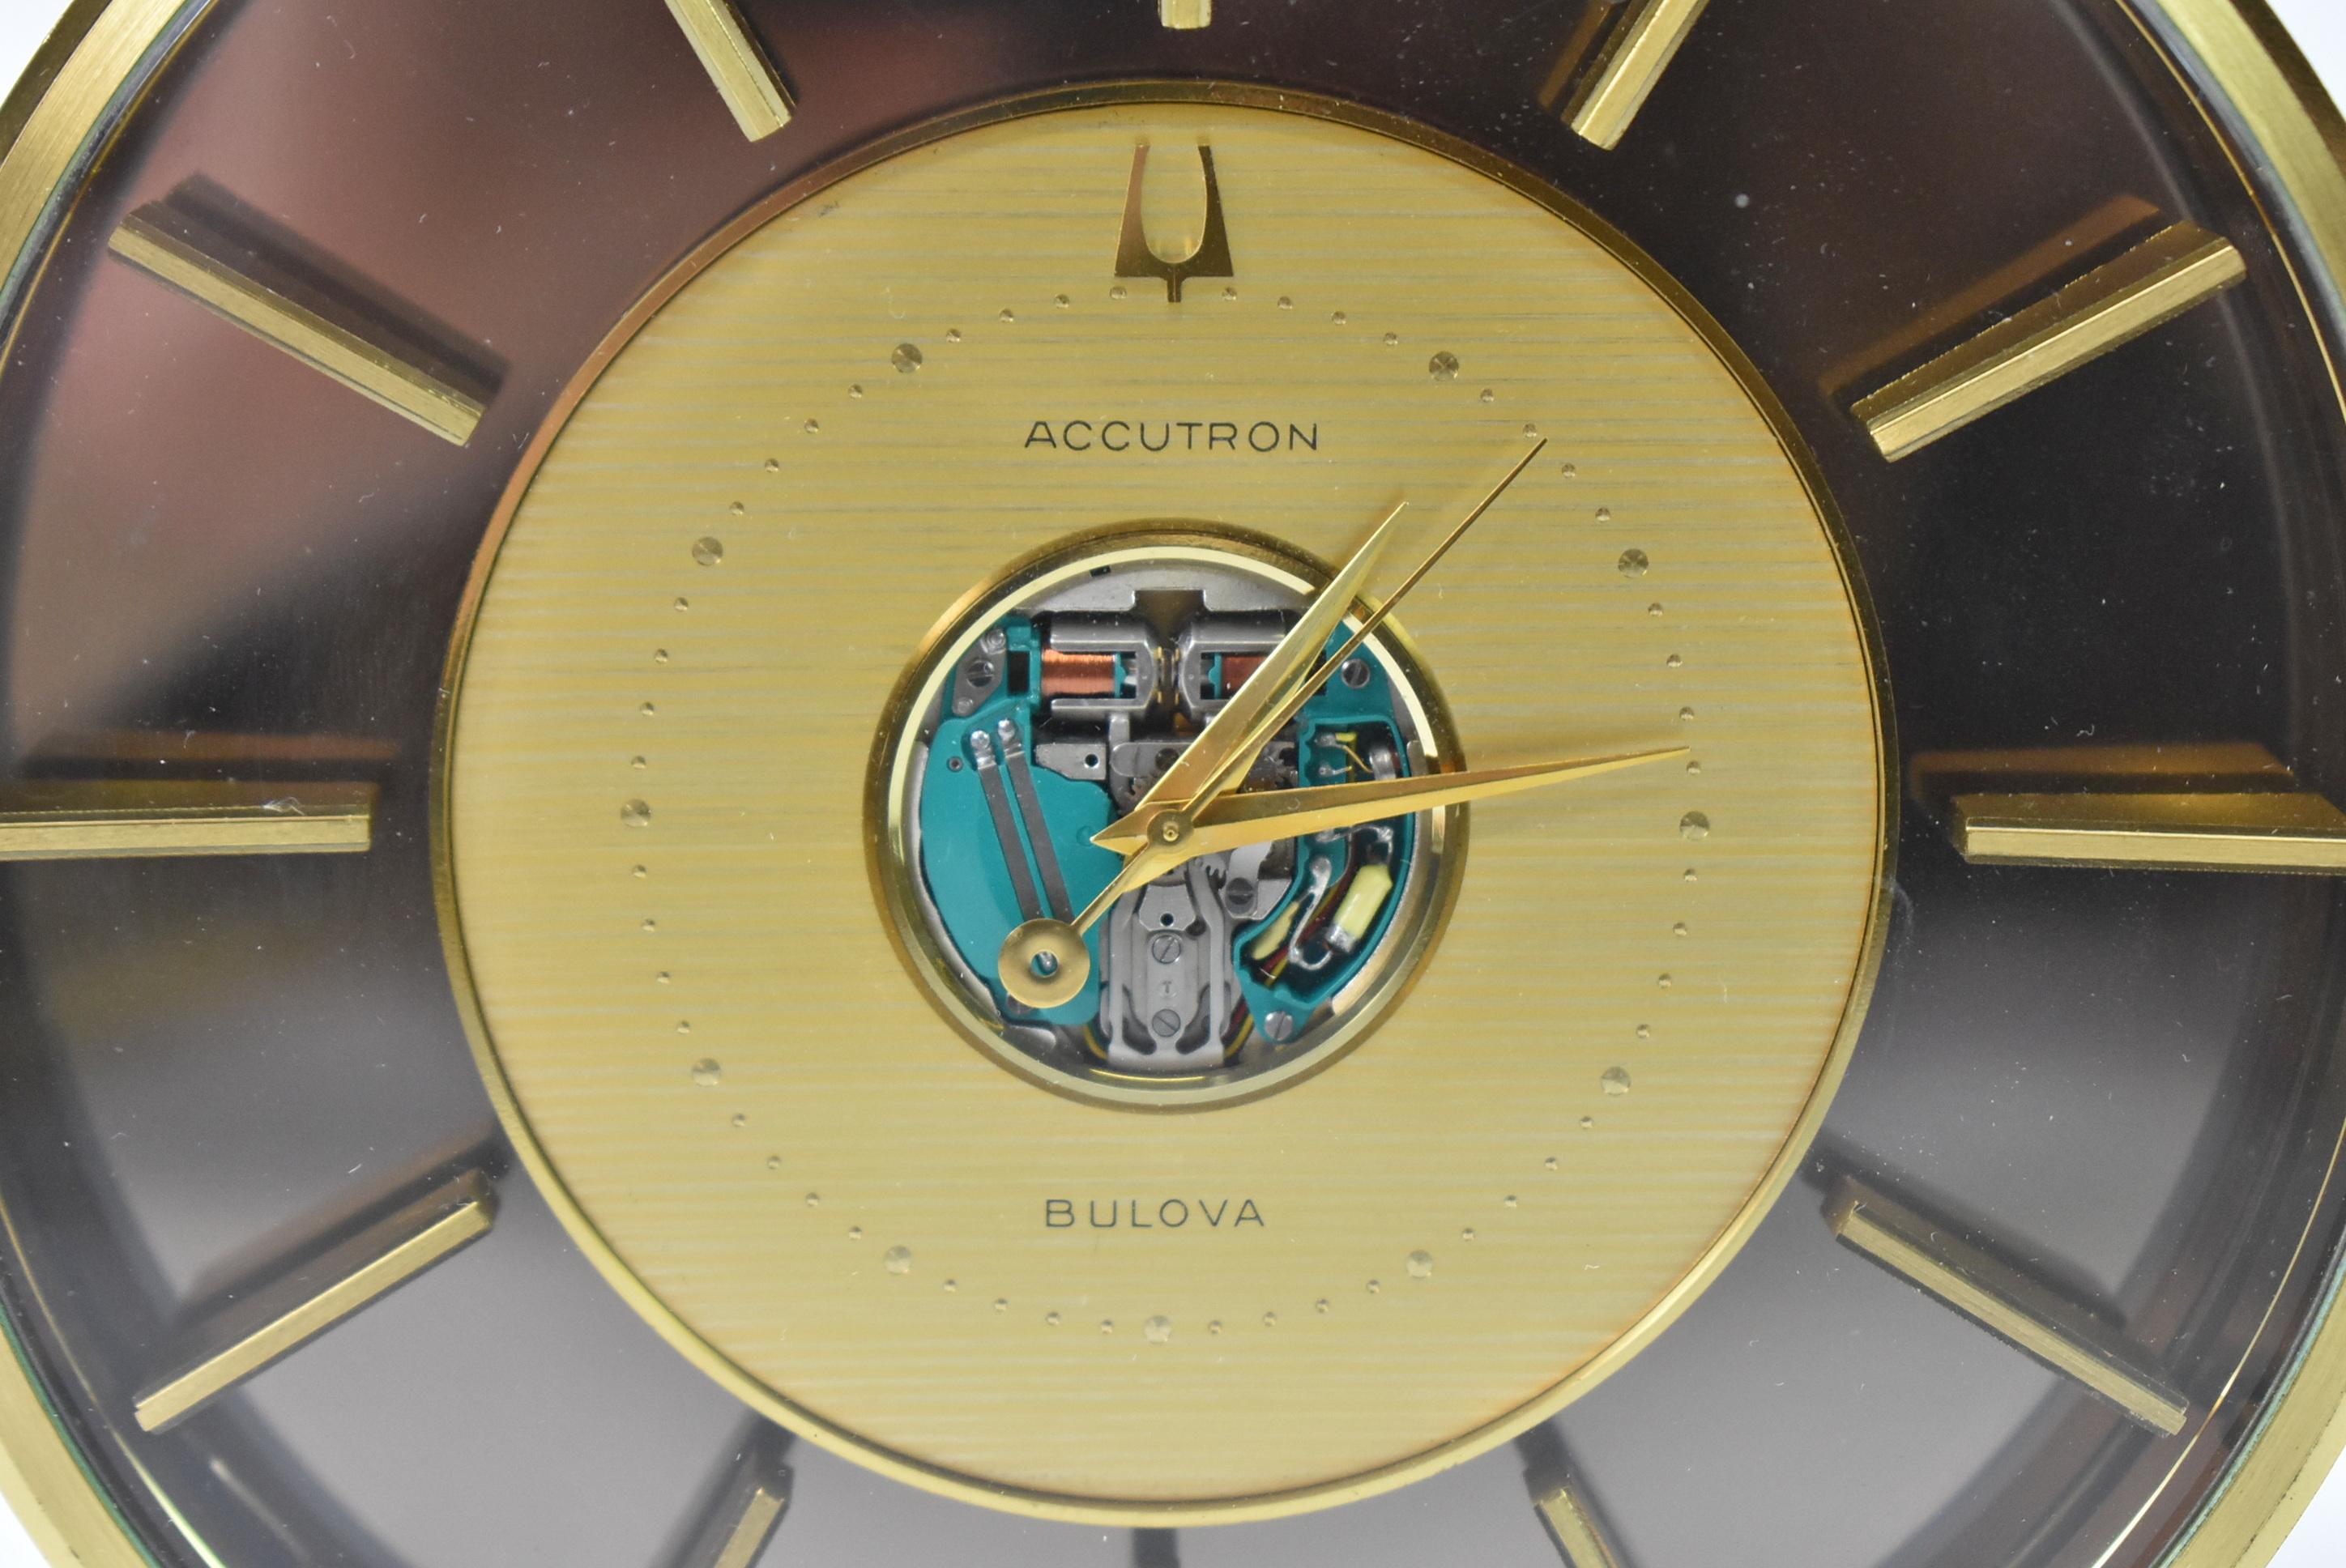 Bulova Accutron Spaceview Desk Clock. Circa 1960's. Floating brass markers on a smoke tone field. All brass frame with a brushed finish. Made in Germany. Great running condition. Dimensions: 6